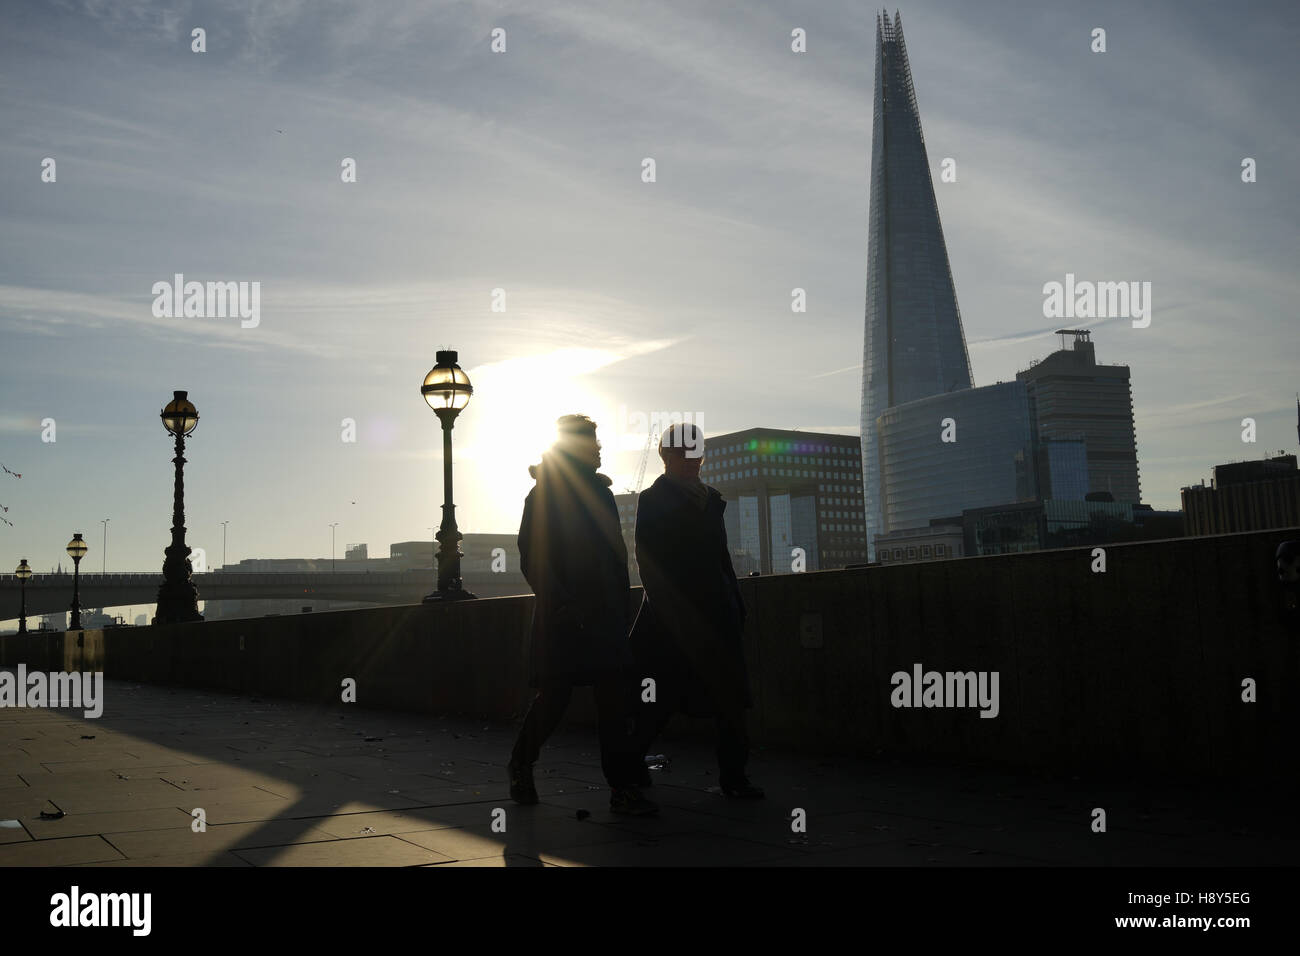 Pair walk along the Thames river with the Shard building in background Stock Photo